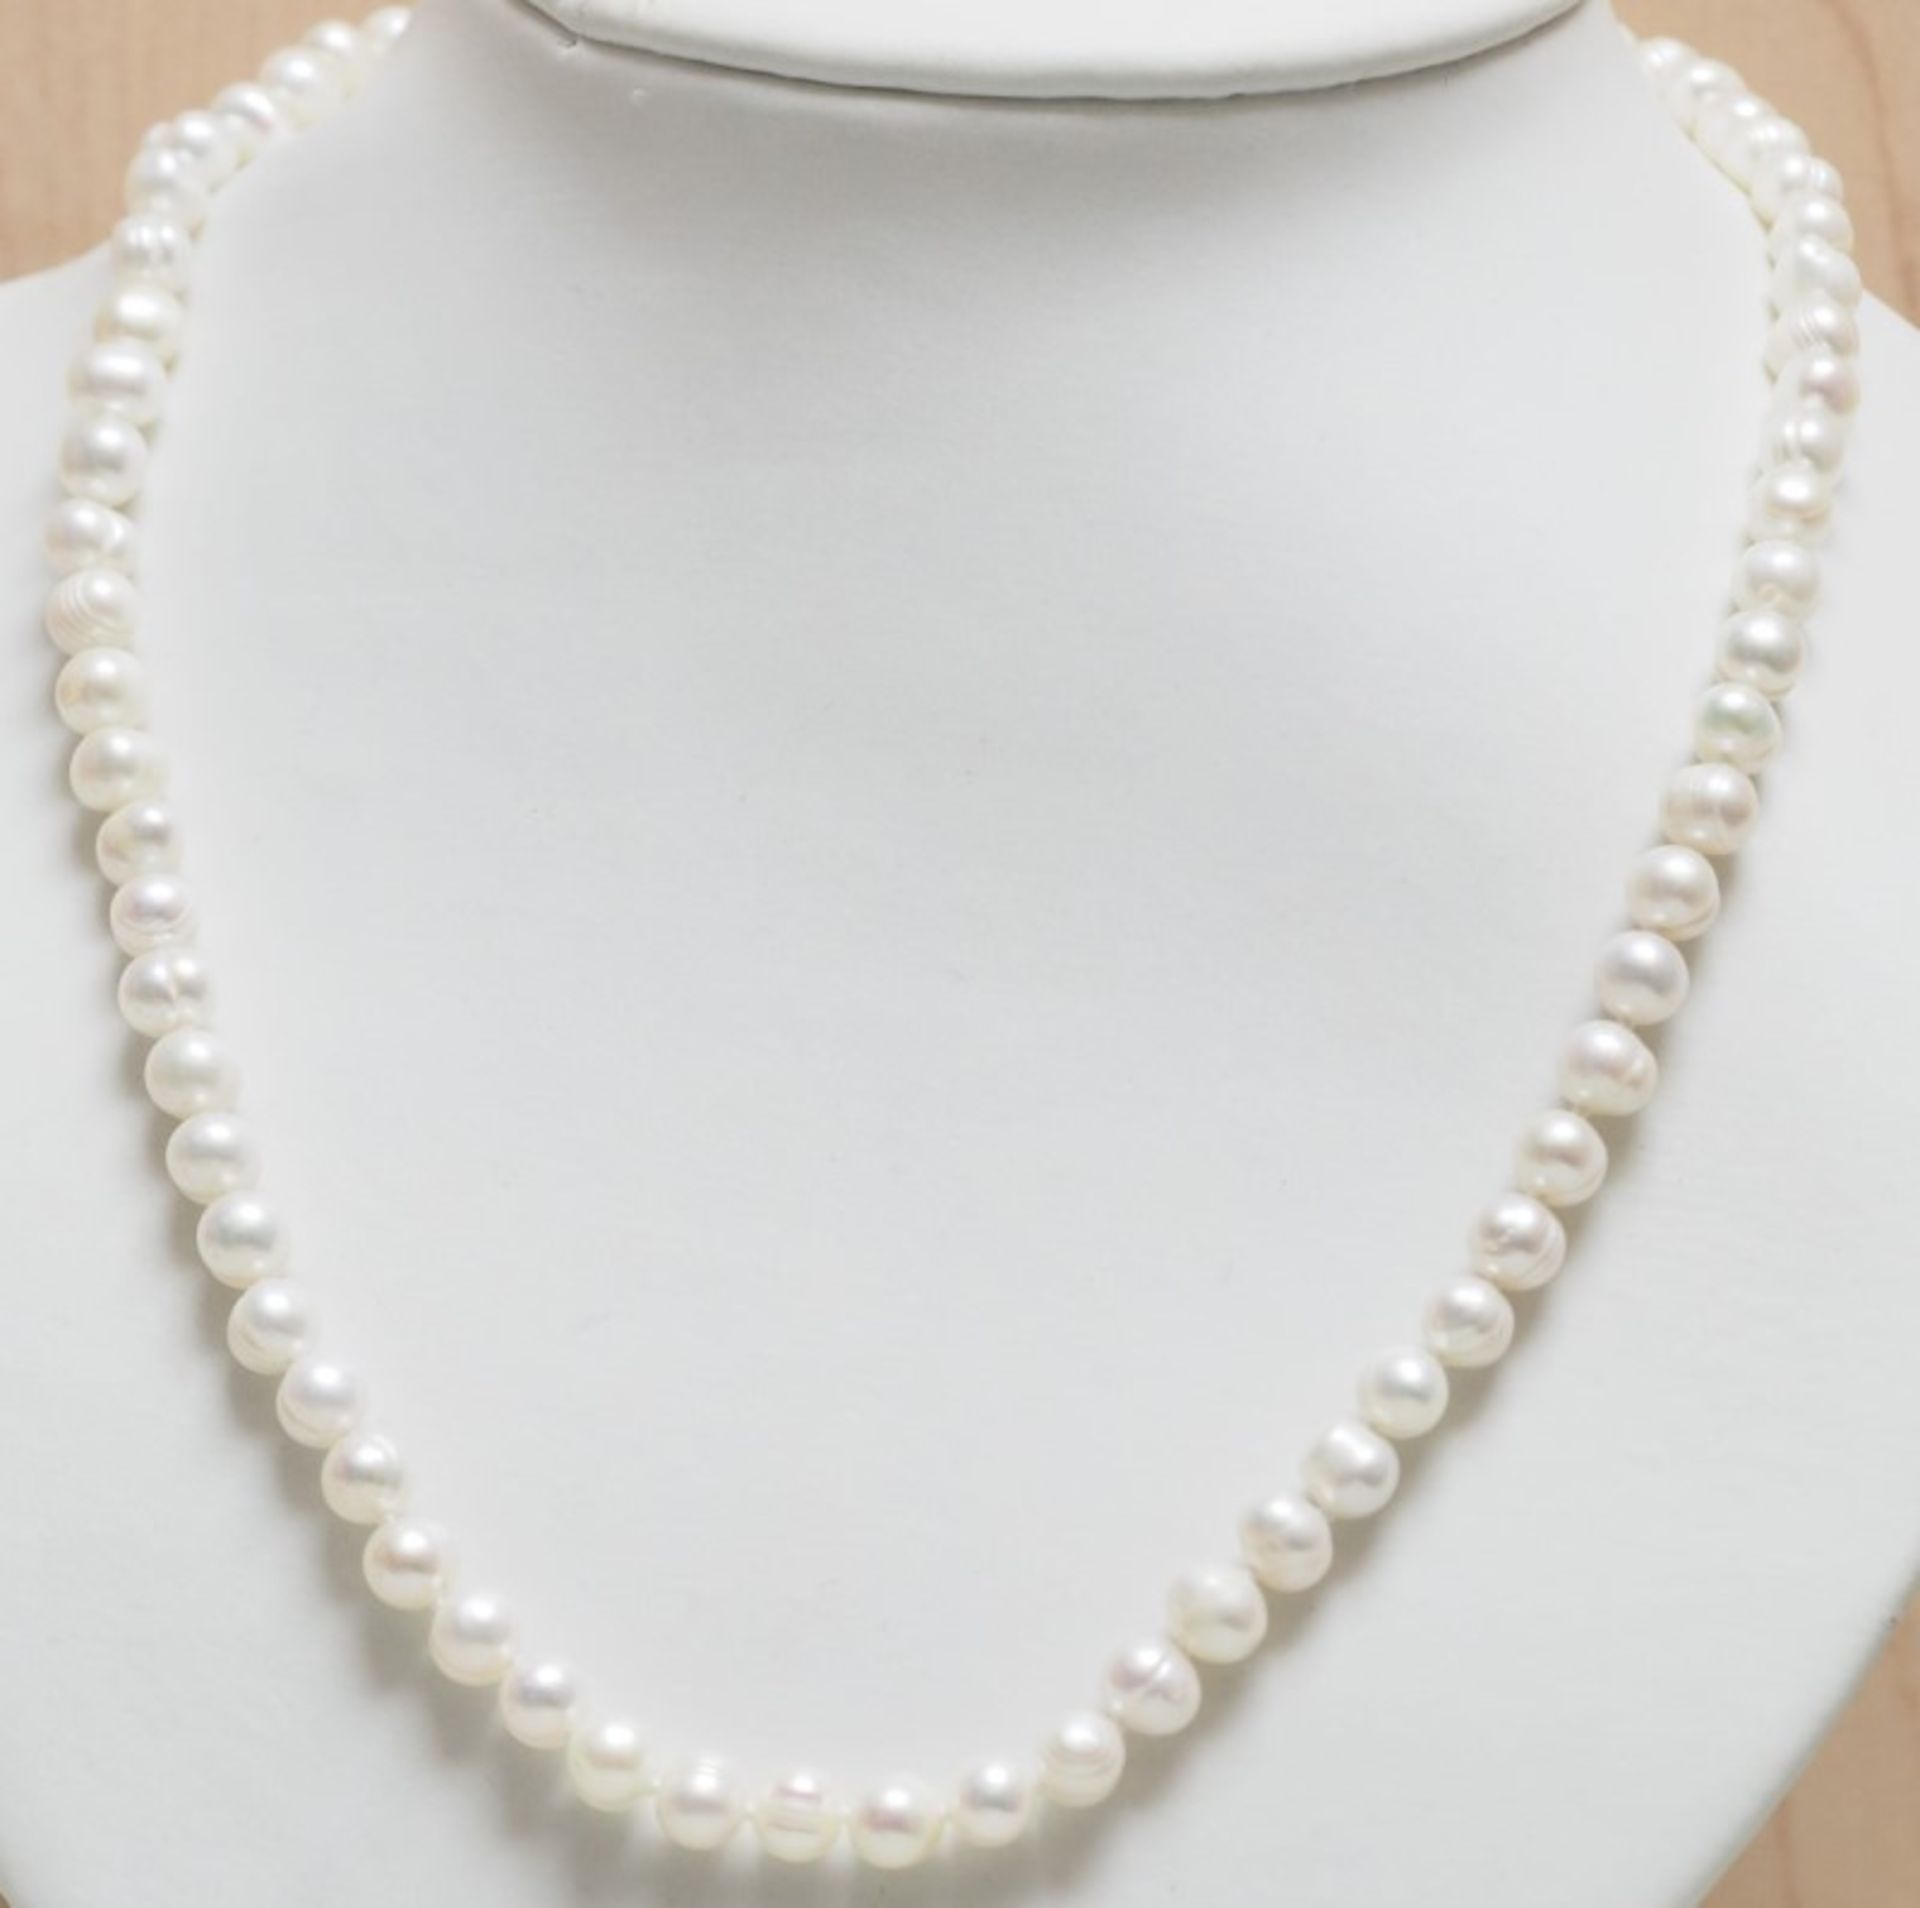 Sterling Freswater Pearl Neckalce Retail $180 - Image 2 of 2